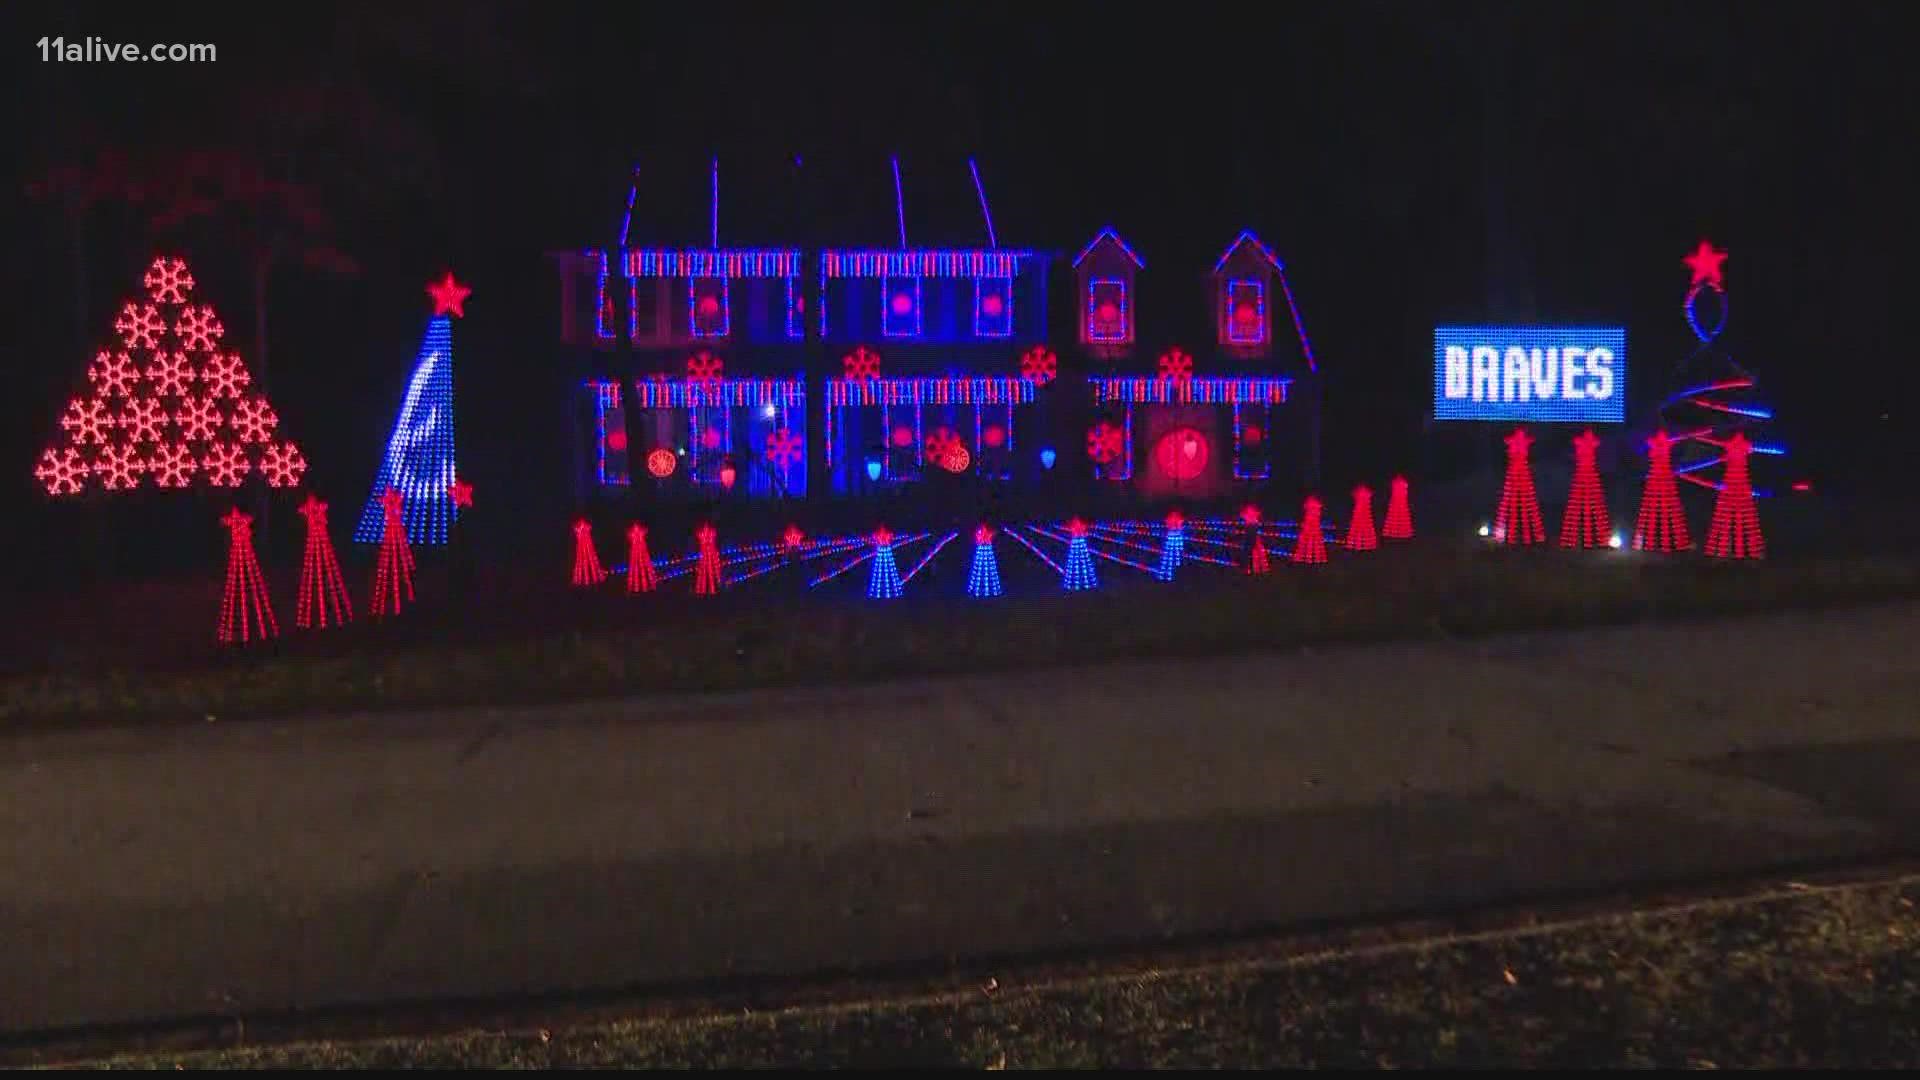 One Atlanta Braves fan decided to show his team spirit with a wonderful light show. Now he's coming forward to discuss his passion.